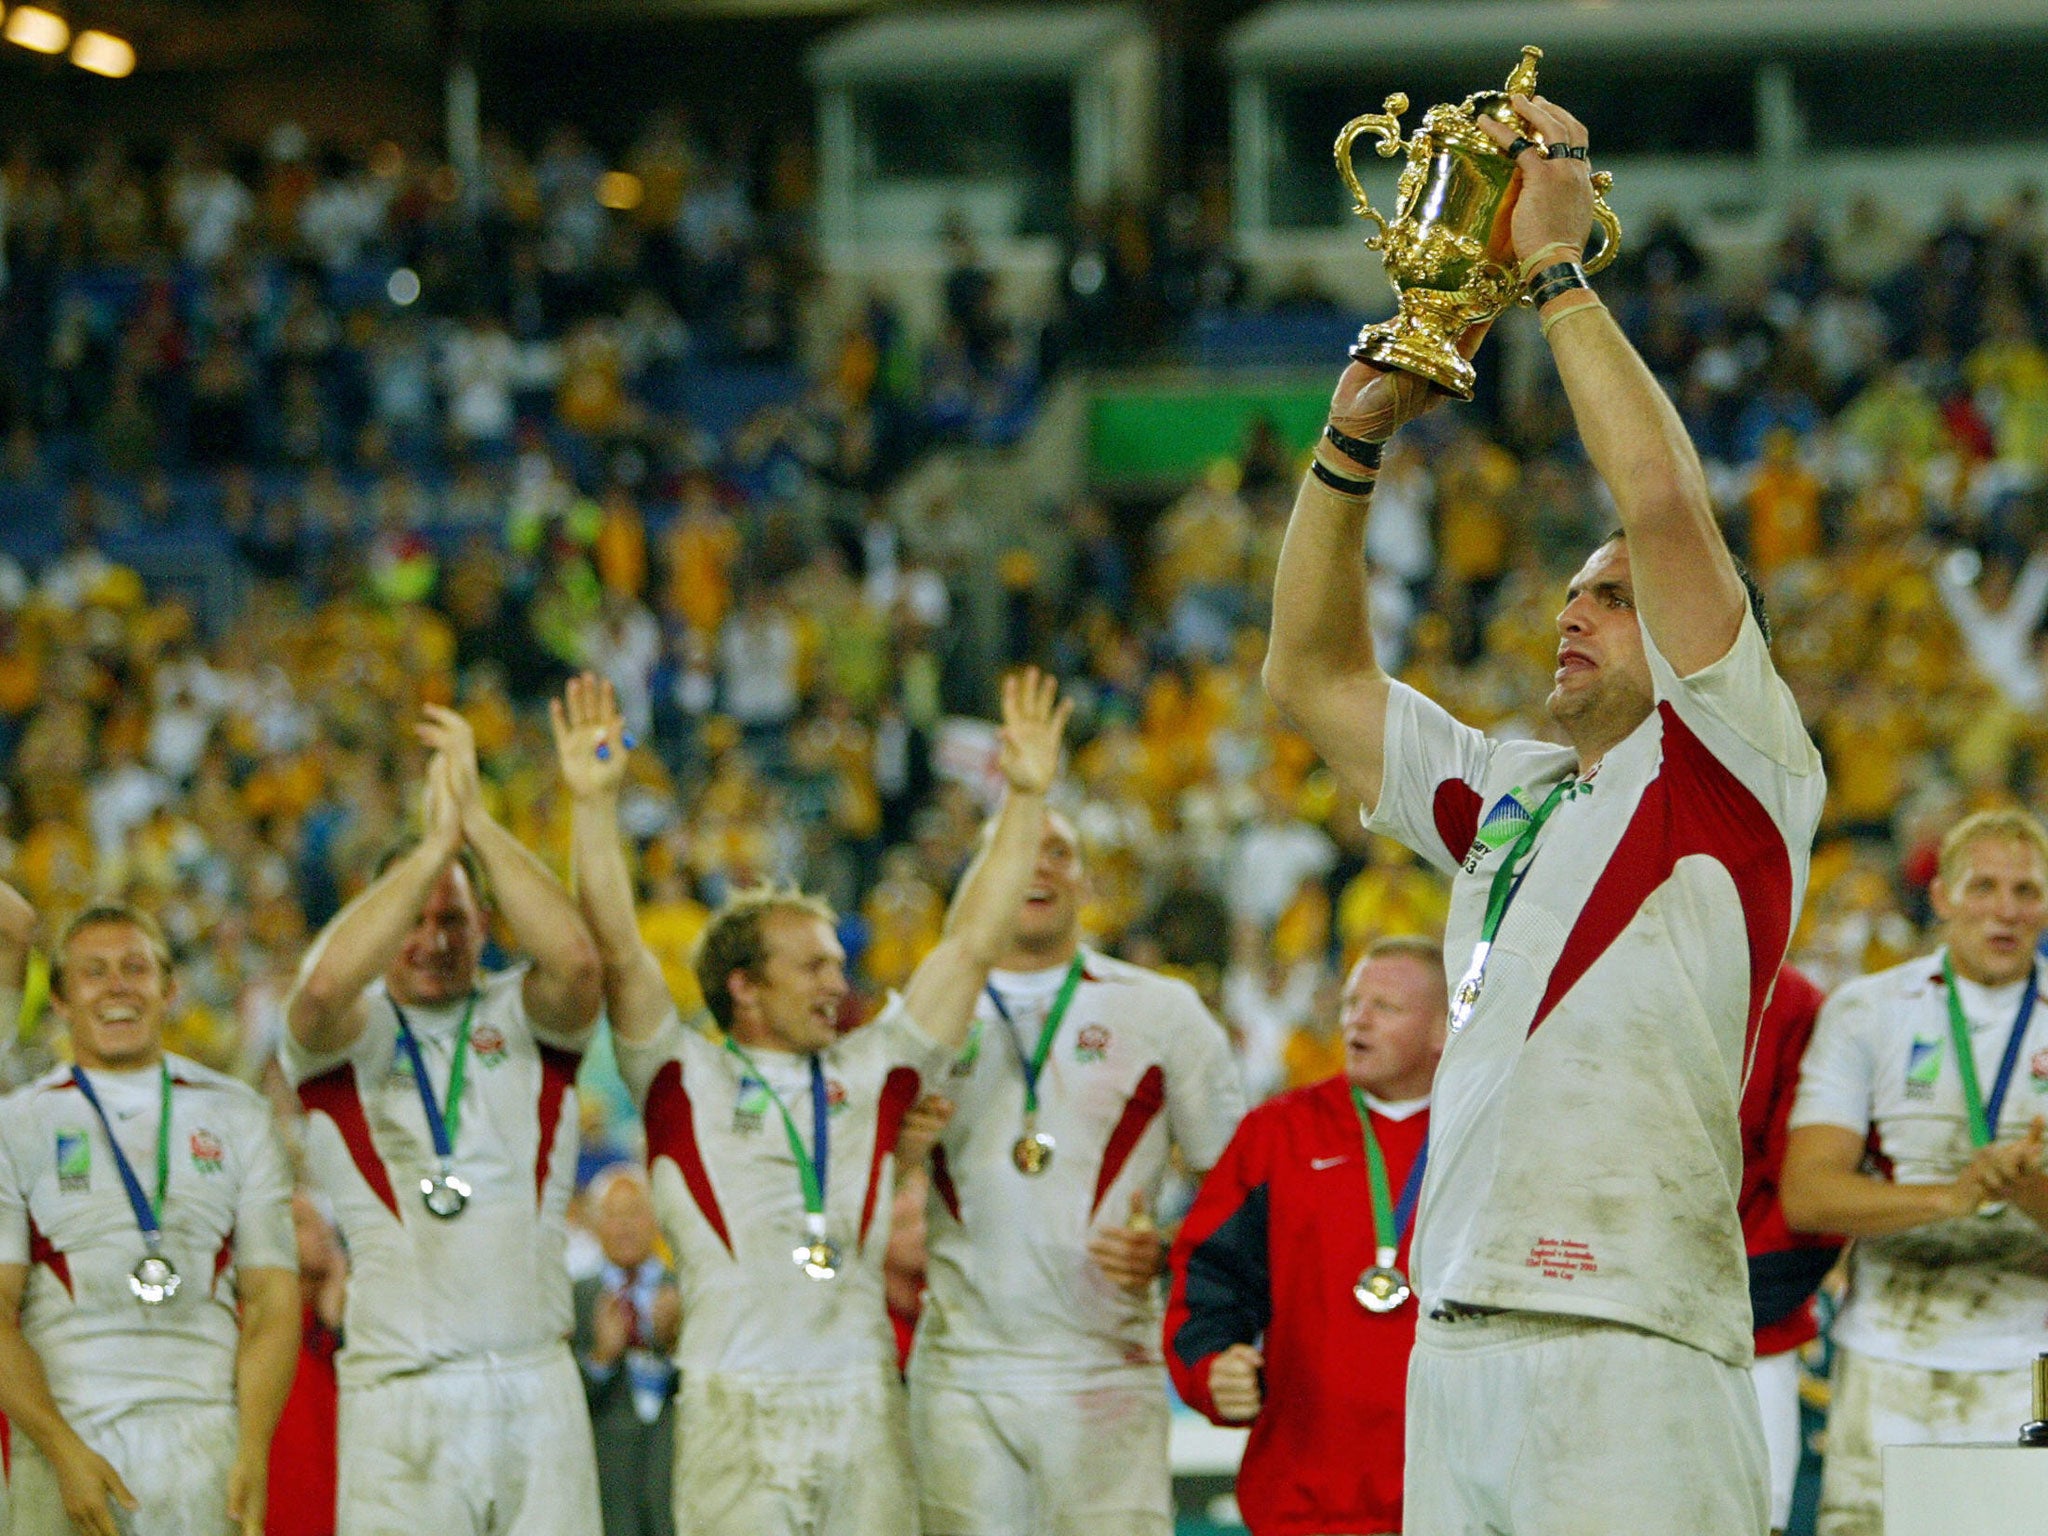 Martin Johnson lifts the Webb Ellis Cup in 2003